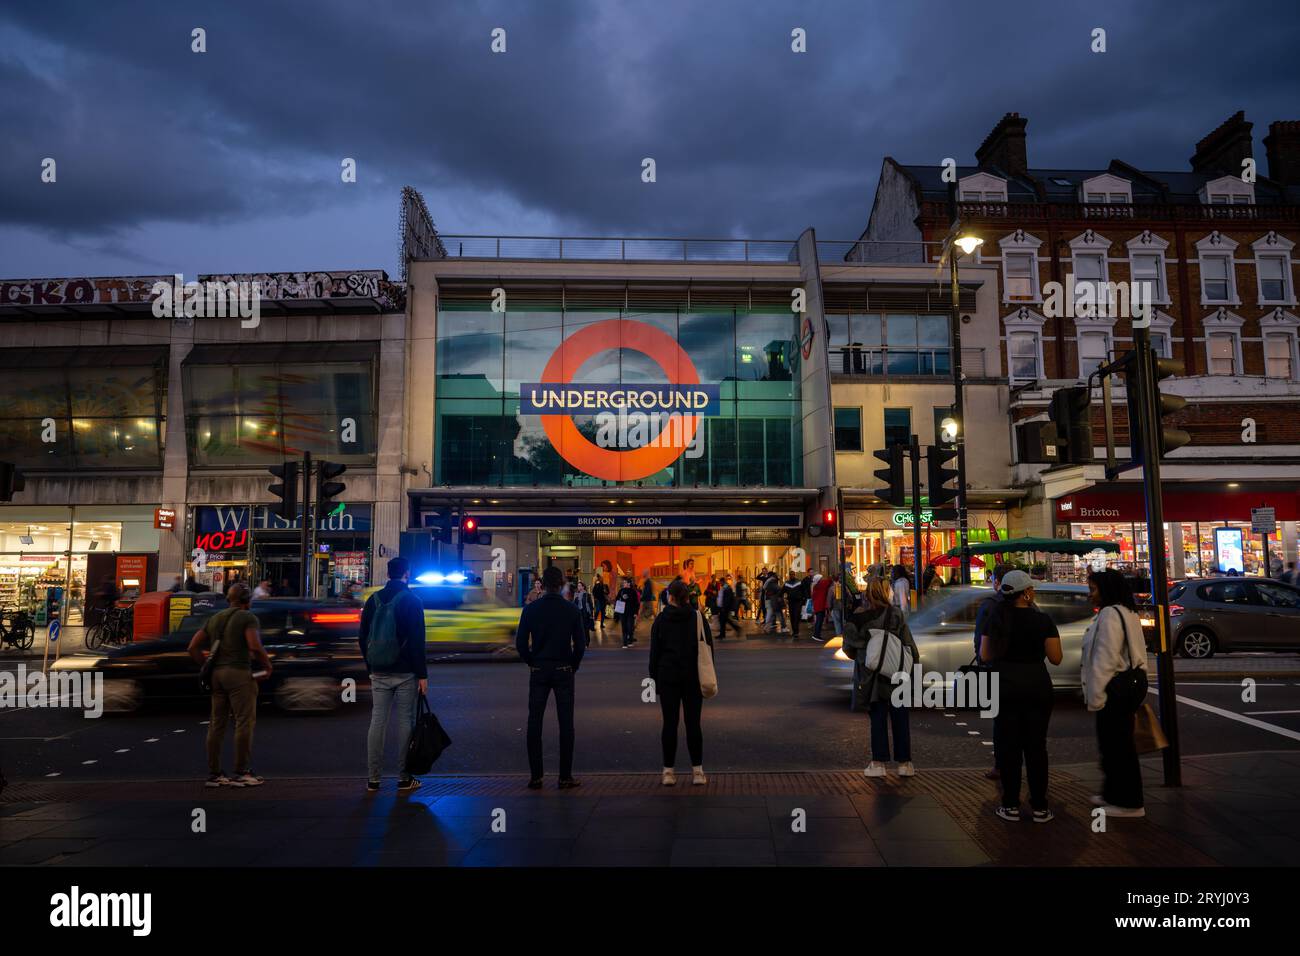 Brixton, London, UK: Pedestrian crossing on Brixton Road opposite Brixton underground station. Evening view with people, traffic and a police car. Stock Photo